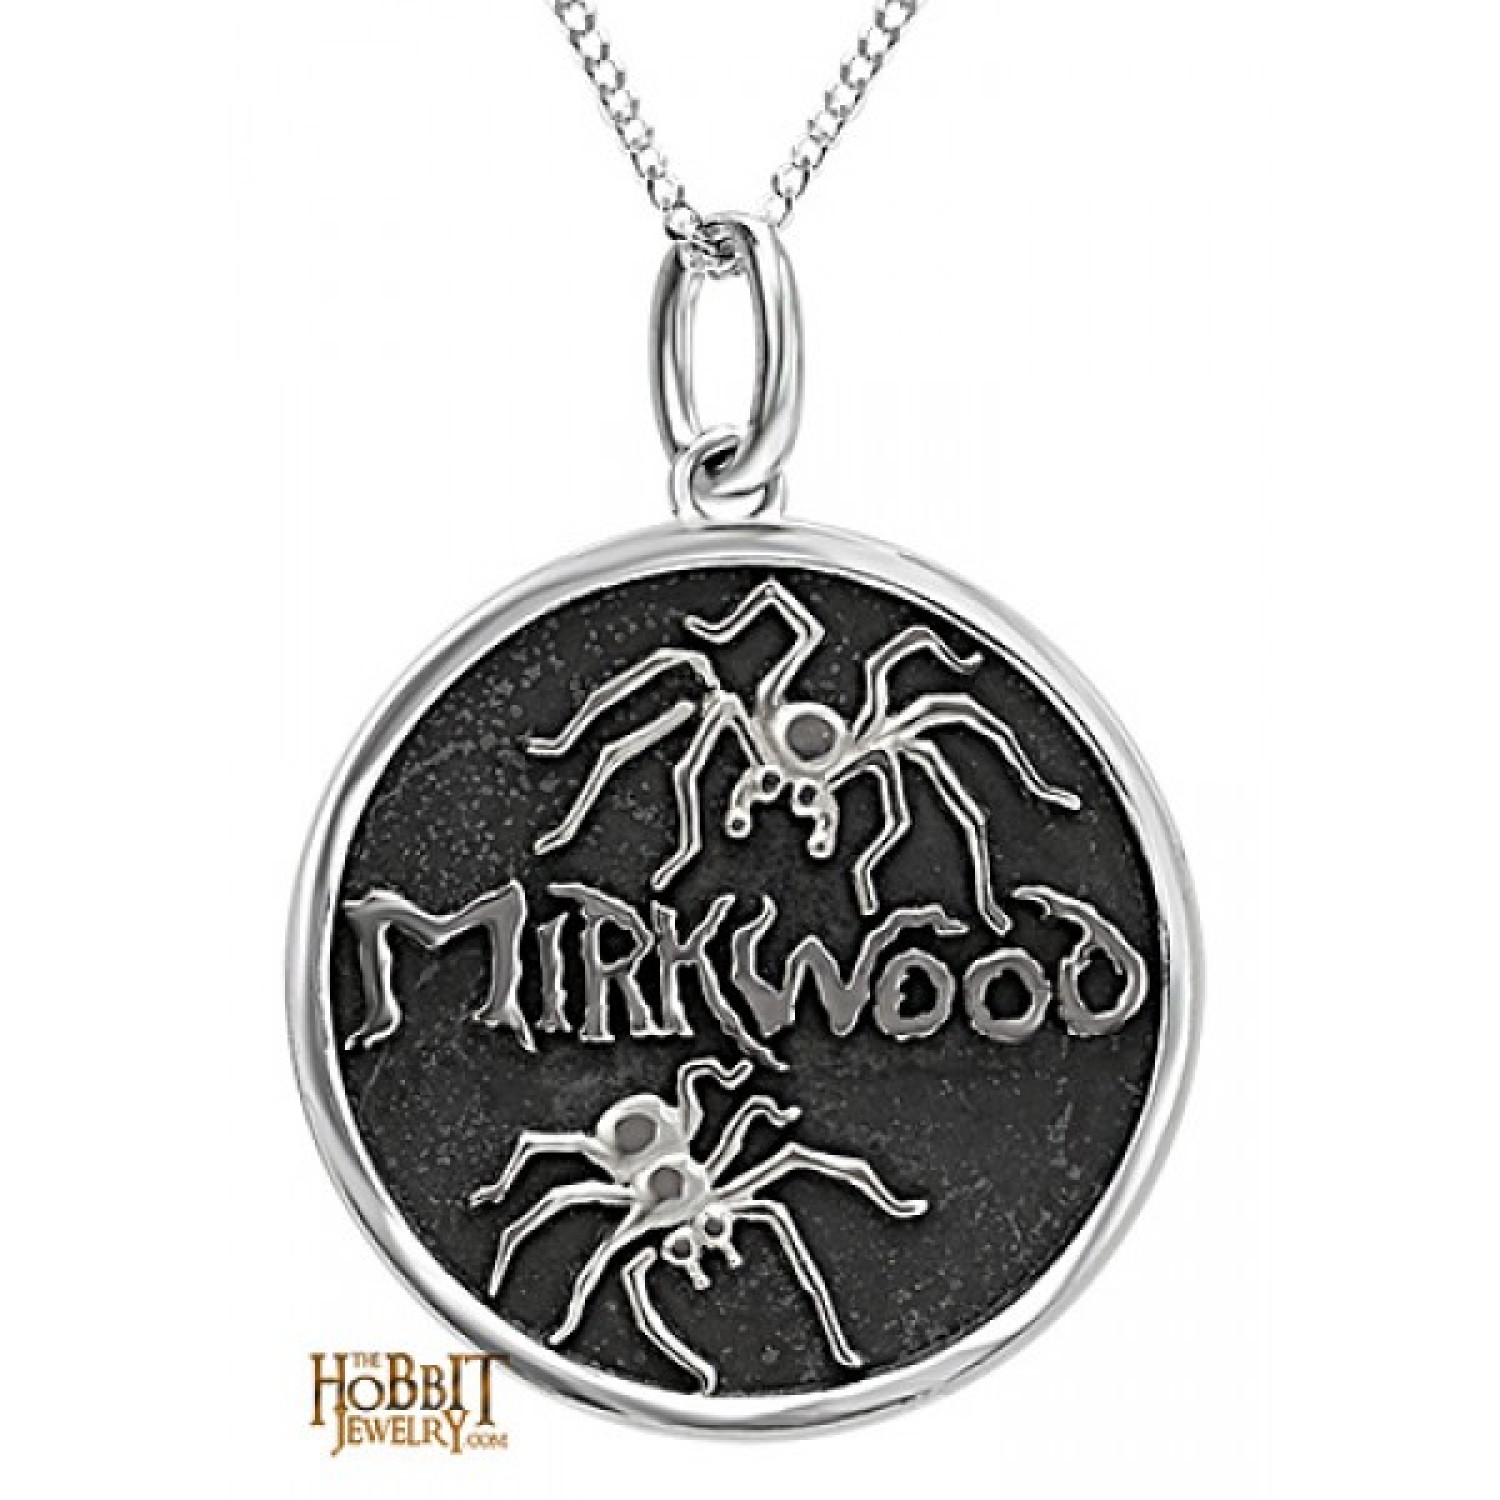 Official The Hobbit Mirkwood Spider Pendant. Official The Hobbit Desolation of Smaug Mirkwood Spider Pendant Mirkwood had been called Greenwood the Great until around the year TA 1050 of the Years of the Sun, when the shadow of the Dark Lord Sauron fell u